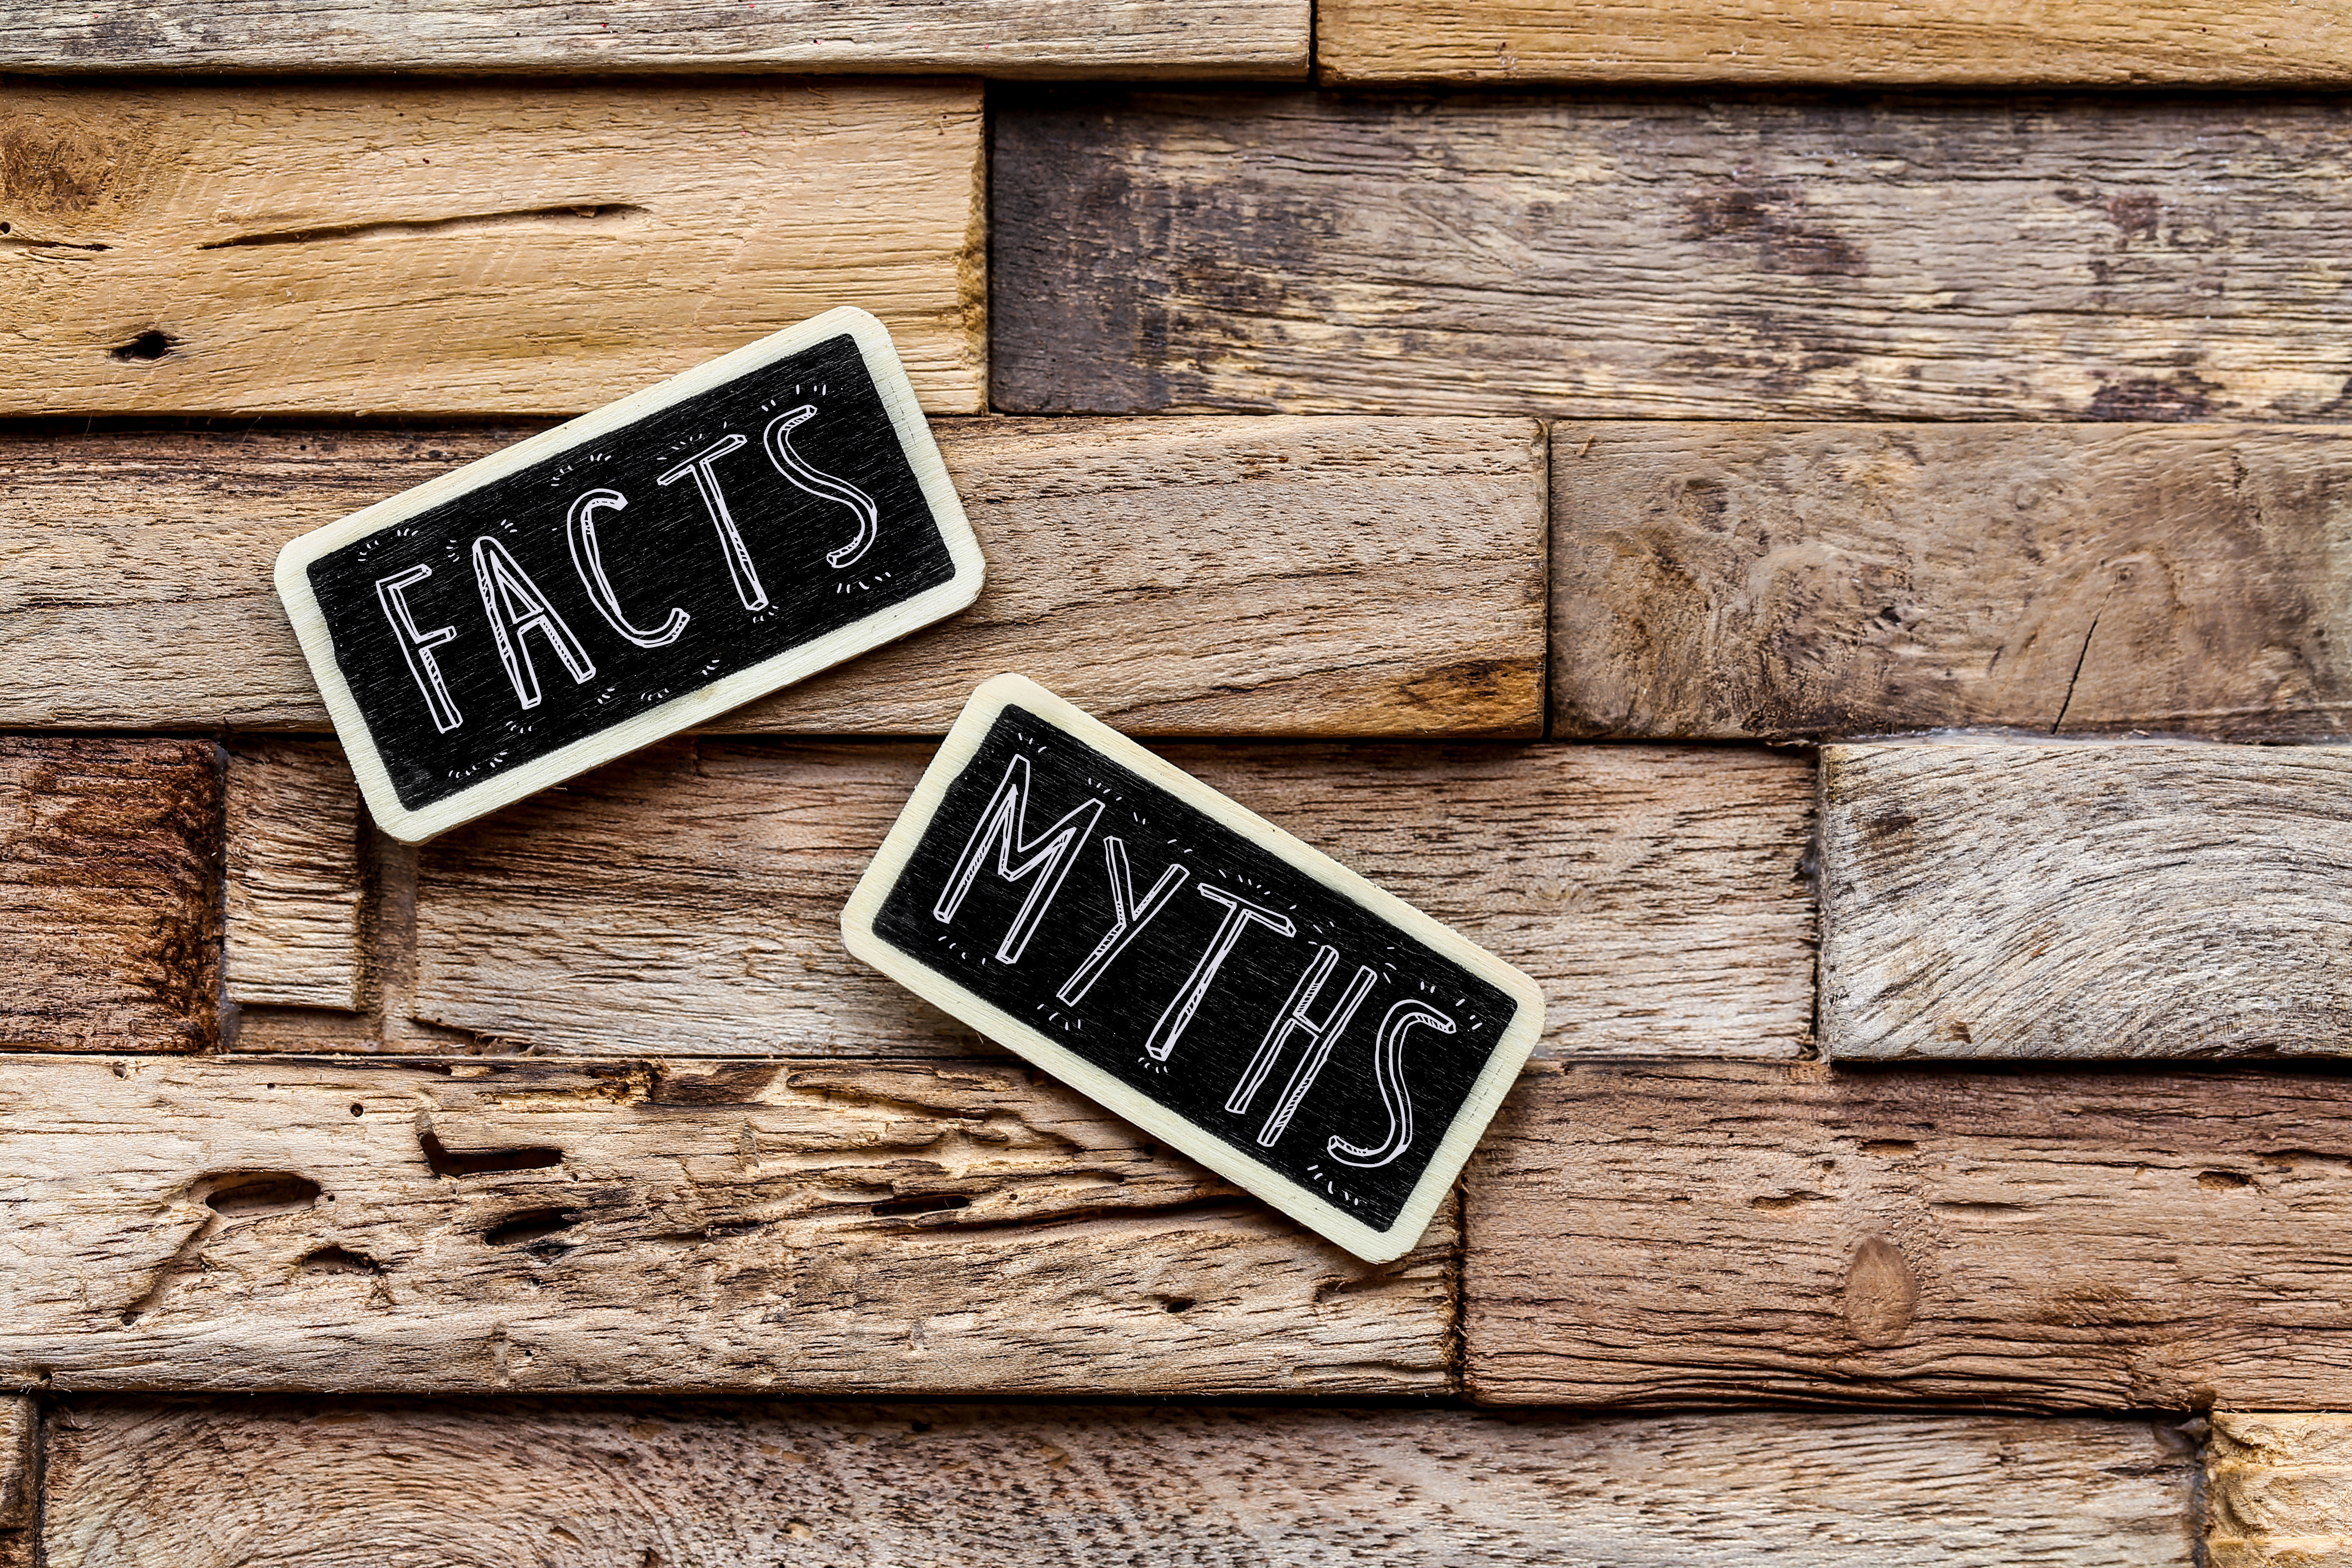 Decorative image of the words "Myths" and "Facts" written on two small chalkboards lying on a rustic wooden table